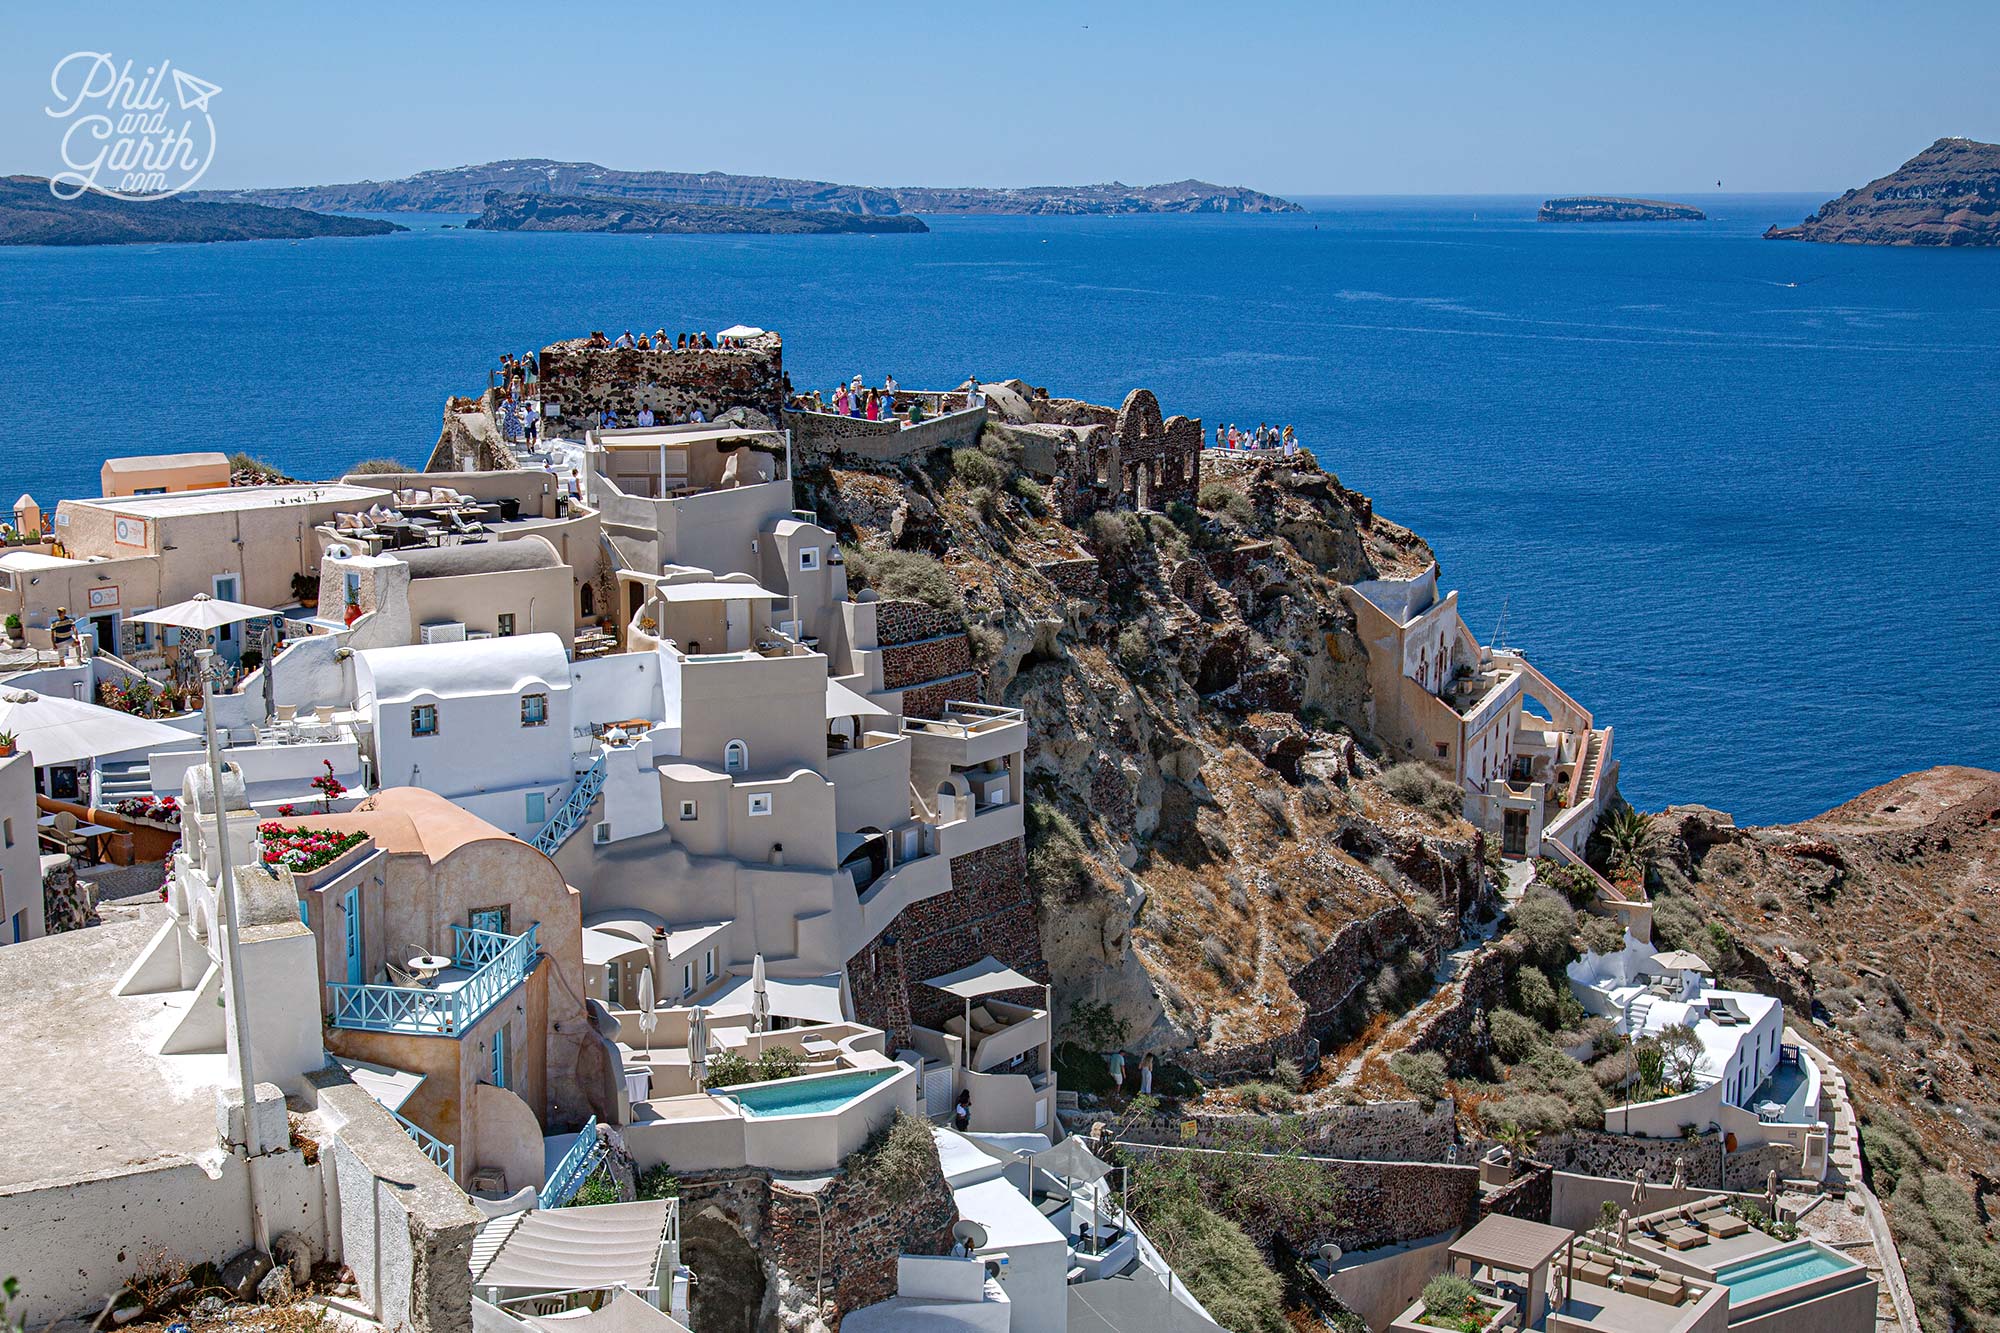 Oia Castle in Santorini is a renowned sunset viewpoint